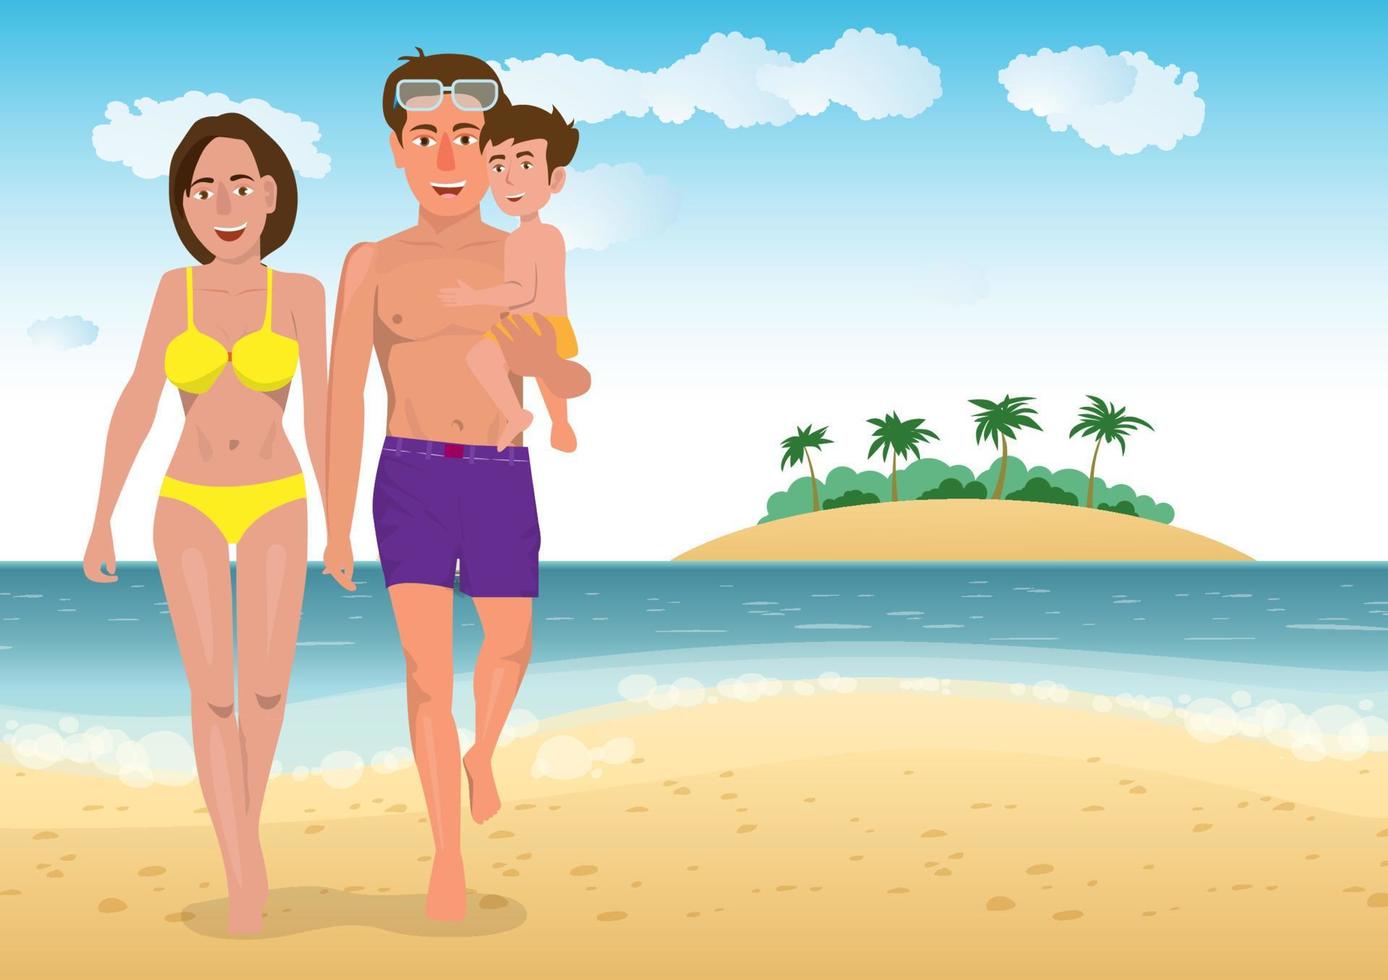 On a family vacation, they went to relax at the sea. happy walk along the beach. Flat style cartoon illustration vector